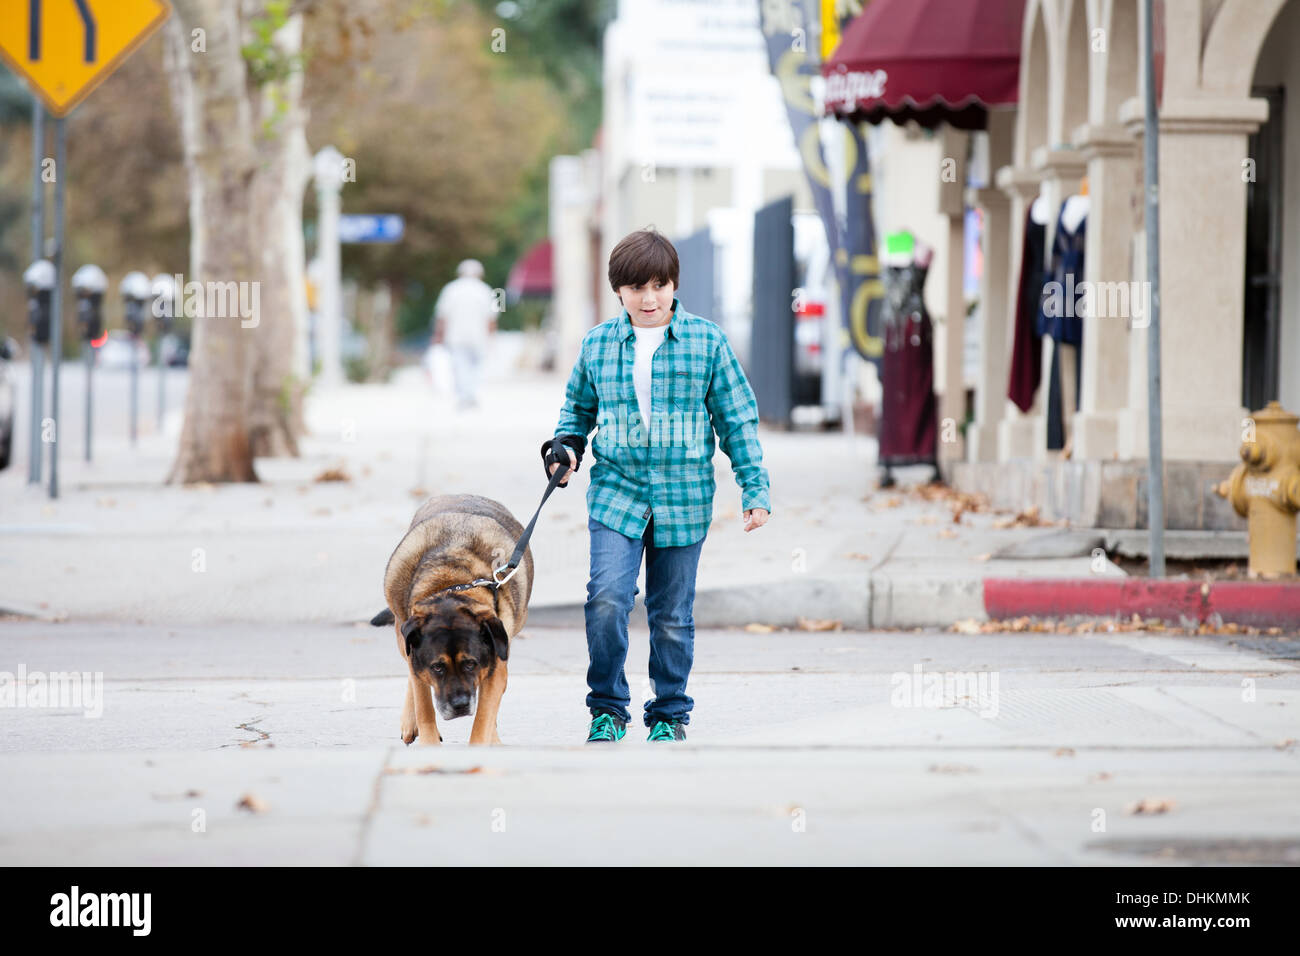 A 10 year old boy and his dog walking down the sidewalk Stock Photo